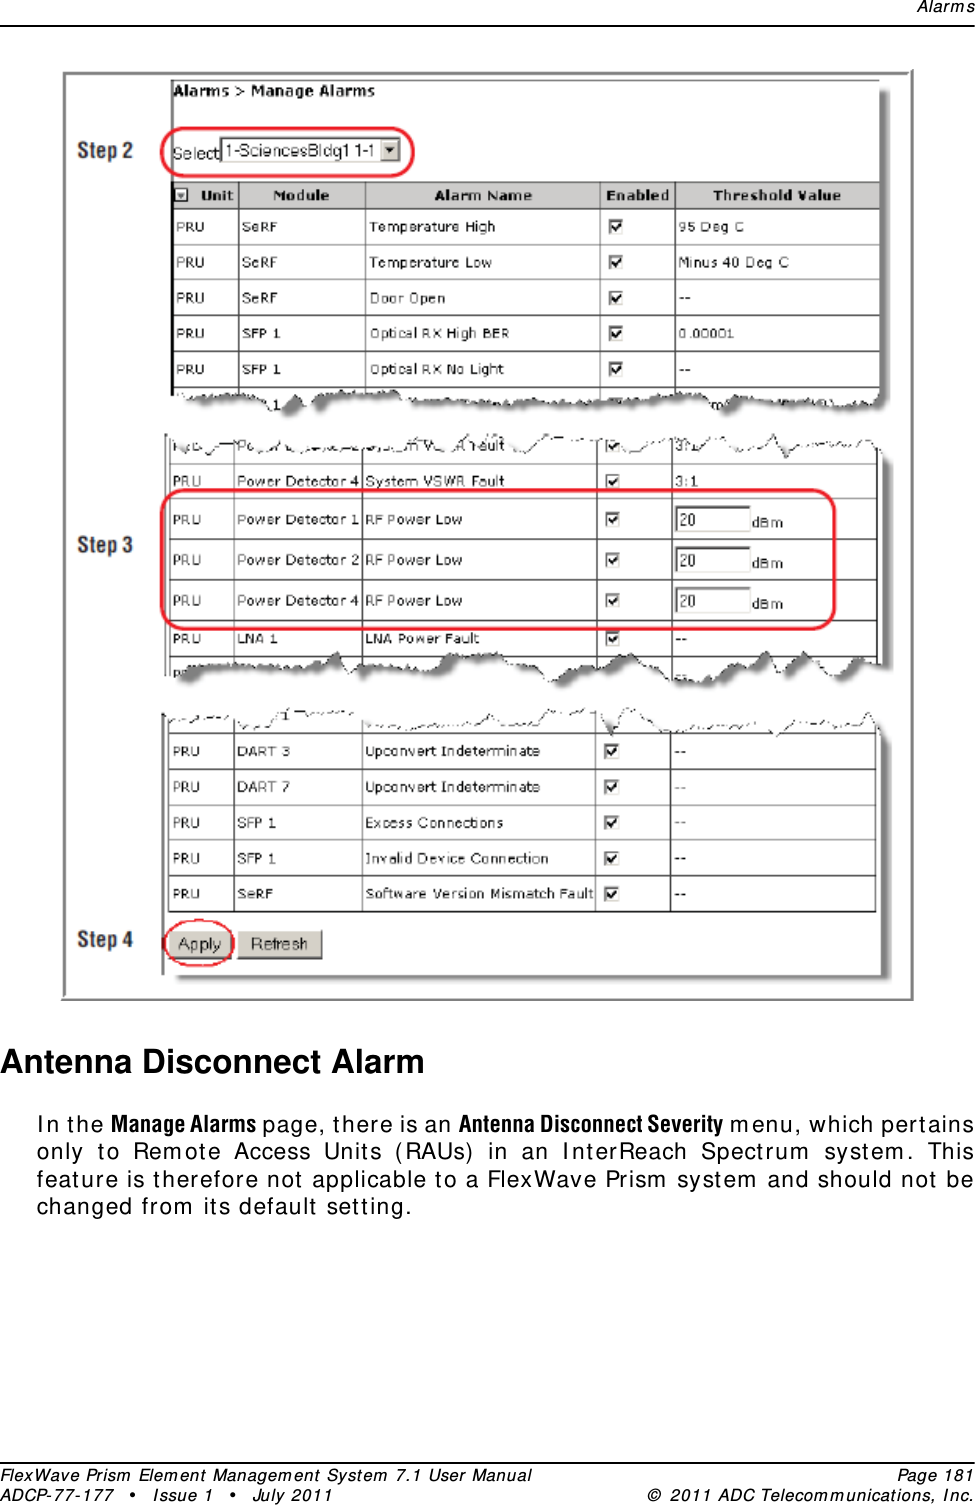 Alar m sFlexWave Prism  Elem ent Managem ent  Syst em  7.1 User Manual Page 181ADCP- 77- 177  • I ssue 1 • July 2011 ©  2011 ADC Telecom m unicat ions, I nc.Antenna Disconnect AlarmI n t he Manage Alarms page, t here is an Antenna Disconnect Severity m enu, which pert ains only t o Rem ot e Access Unit s ( RAUs)  in an I nt erReach Spectrum  system . This feature is therefore not  applicable t o a FlexWave Prism  syst em  and should not  be changed from  its default  setting.